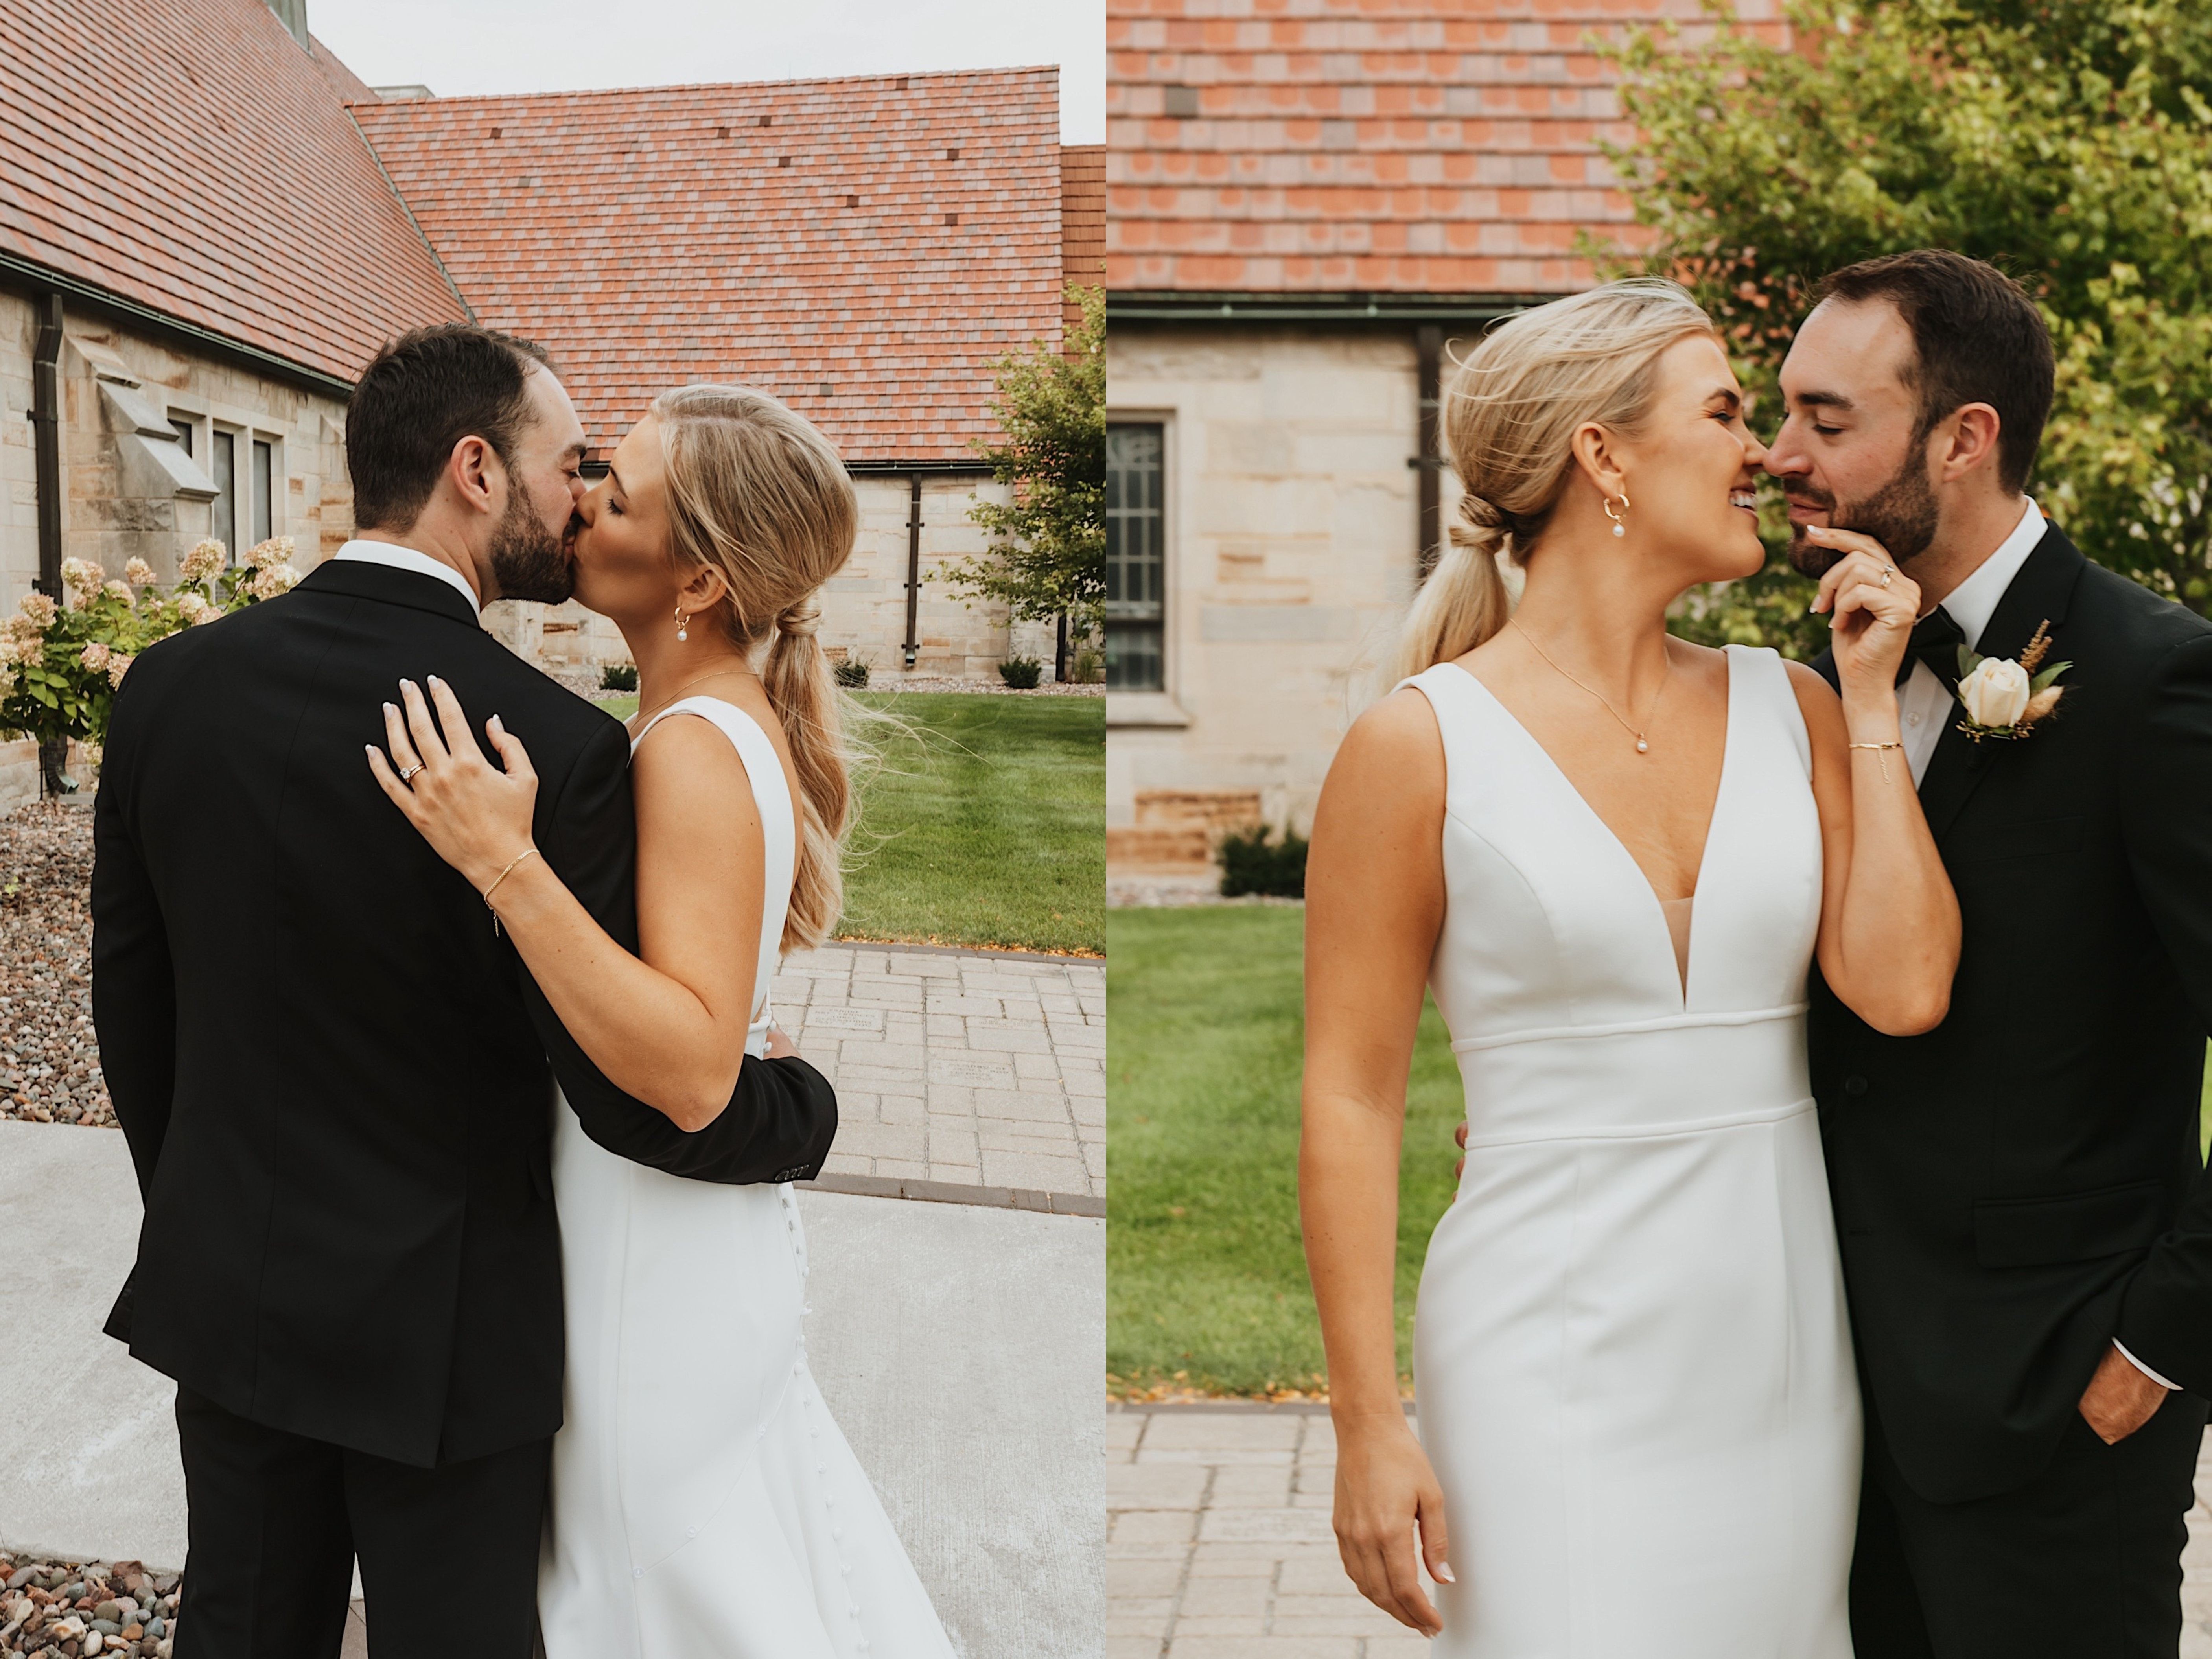 2 photos side by side, the left is of a bride and groom kissing facing away from the camera, the right is of them about to kiss while facing the camera